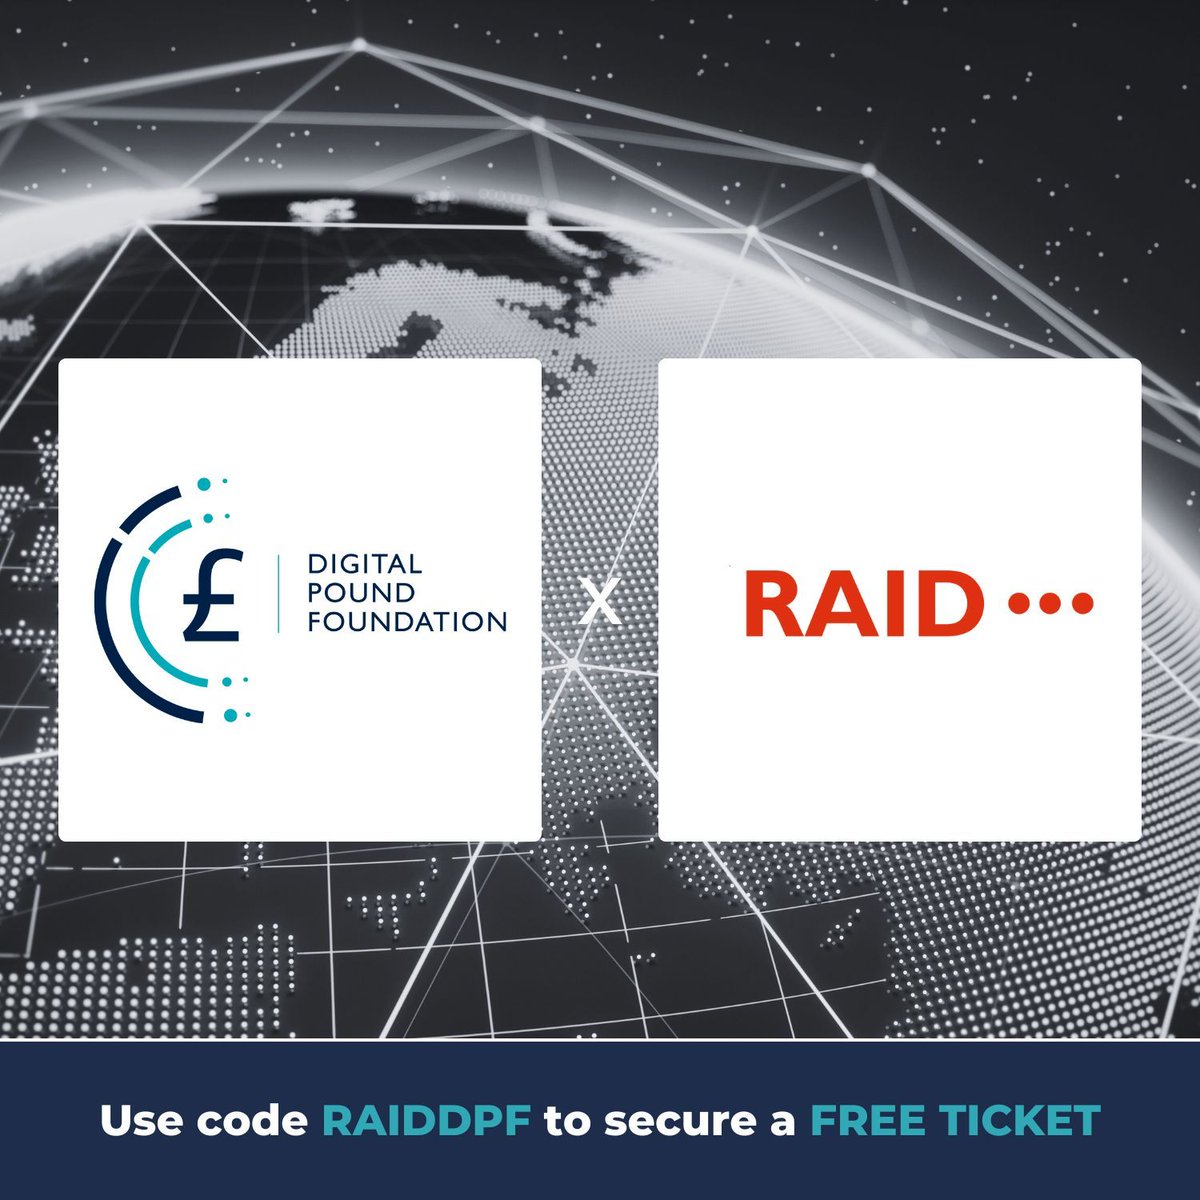 Have you secured your FREE TICKET for tomorrow's RAID Virtual event? As an official partner of the event, we have secured free tickets for our community. Use promo code RAIDDPF to secure your free place 👉 buff.ly/3vrhPAZ ... #DigitalMoney #DigitalCurrencies #Fintech